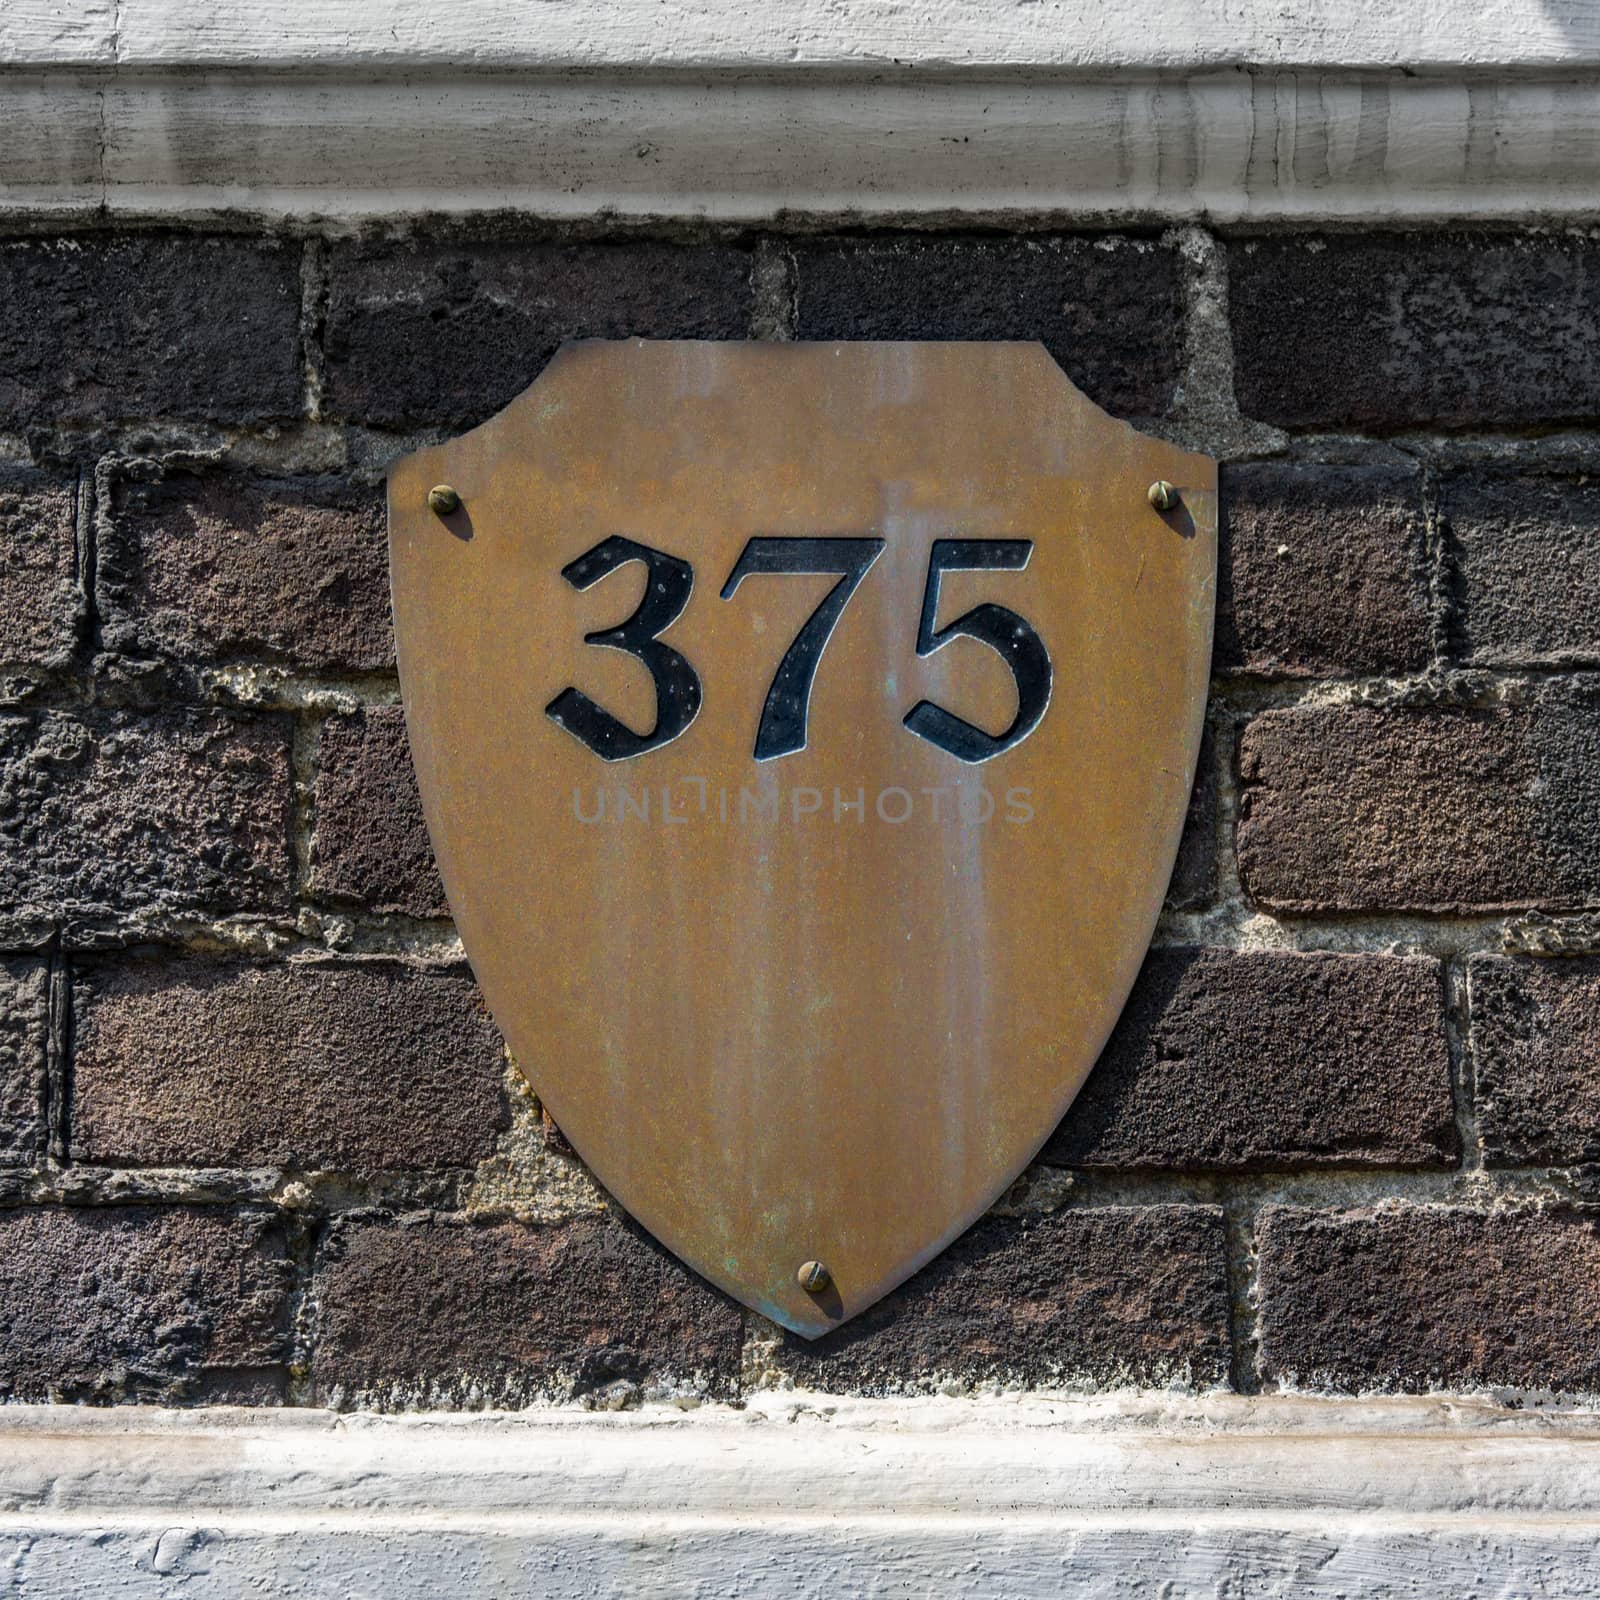 House number thee hundred and seventy three (373)